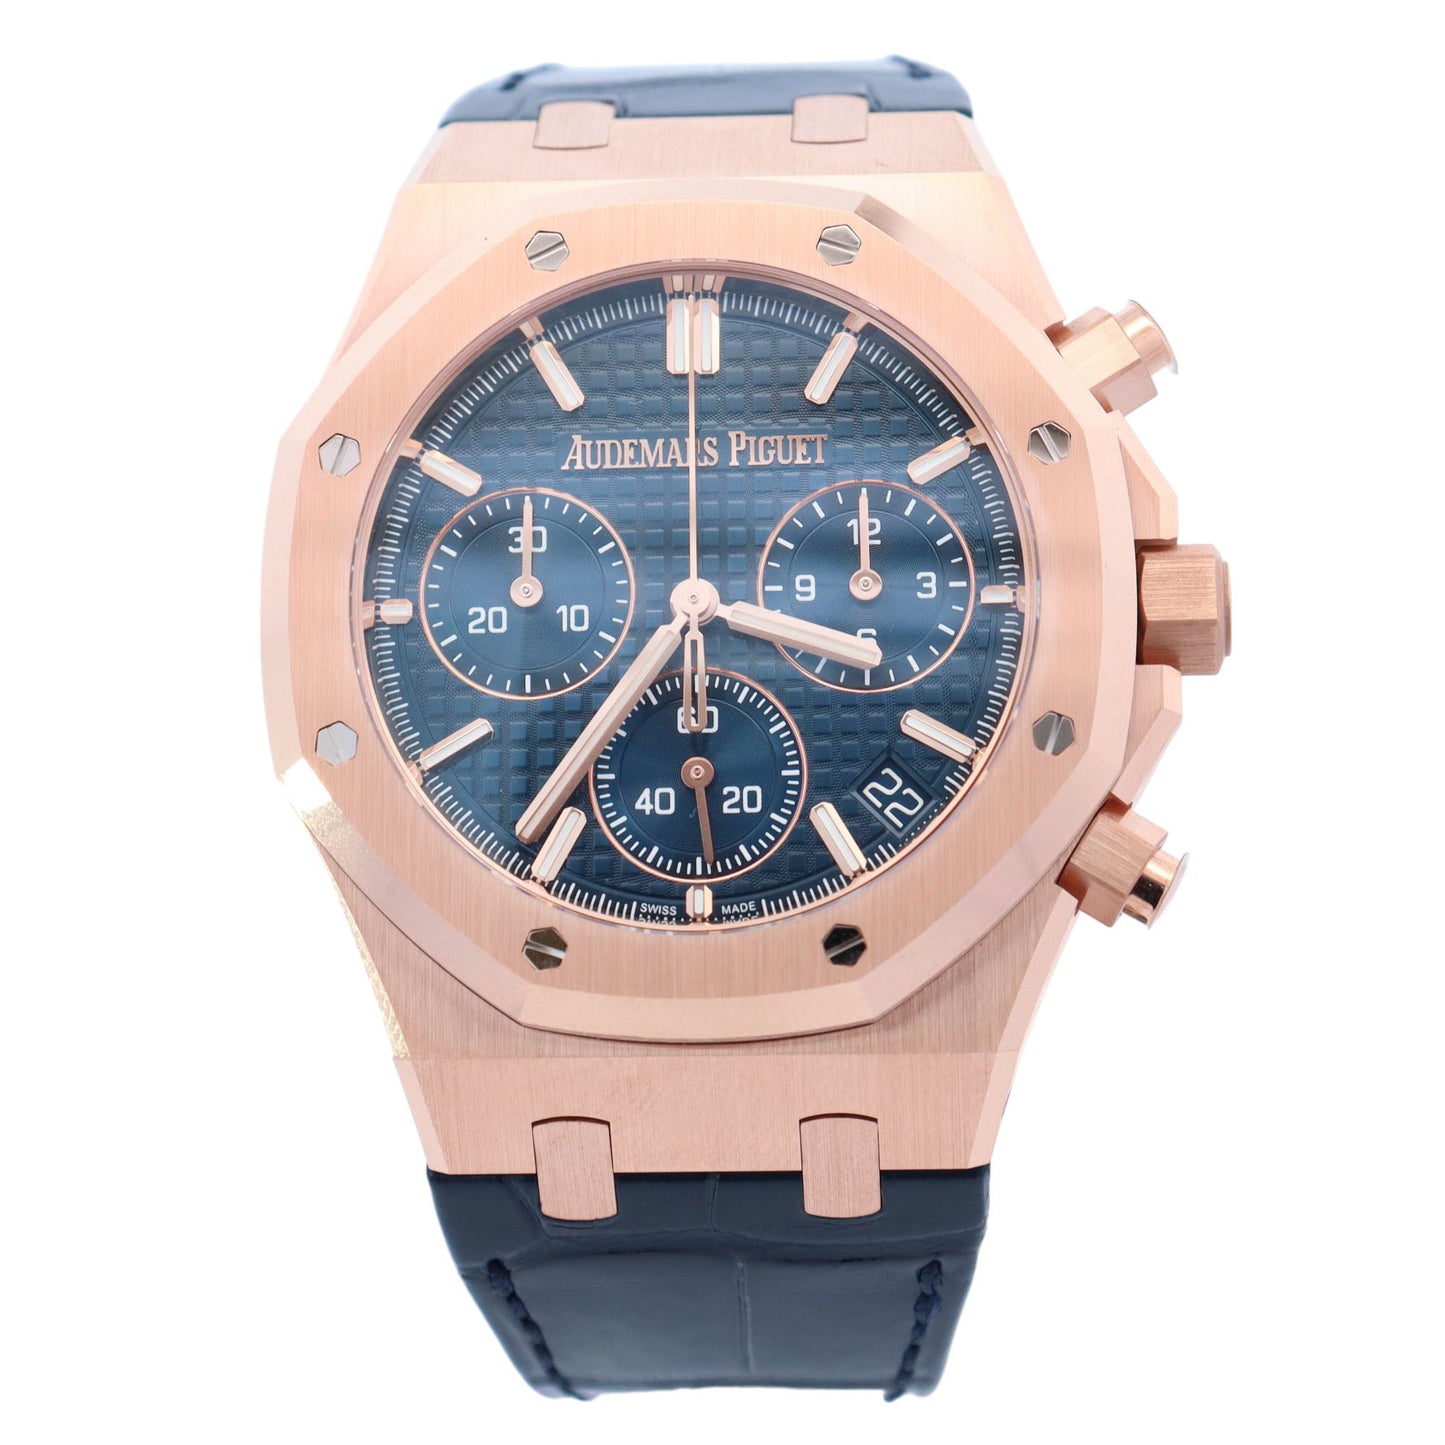 Audemars Piguet Royal Oak 41mm Rose Gold Blue Chronograph Dial Watch Reference# 26240OR.OO.D315CR.02 - Happy Jewelers Fine Jewelry Lifetime Warranty